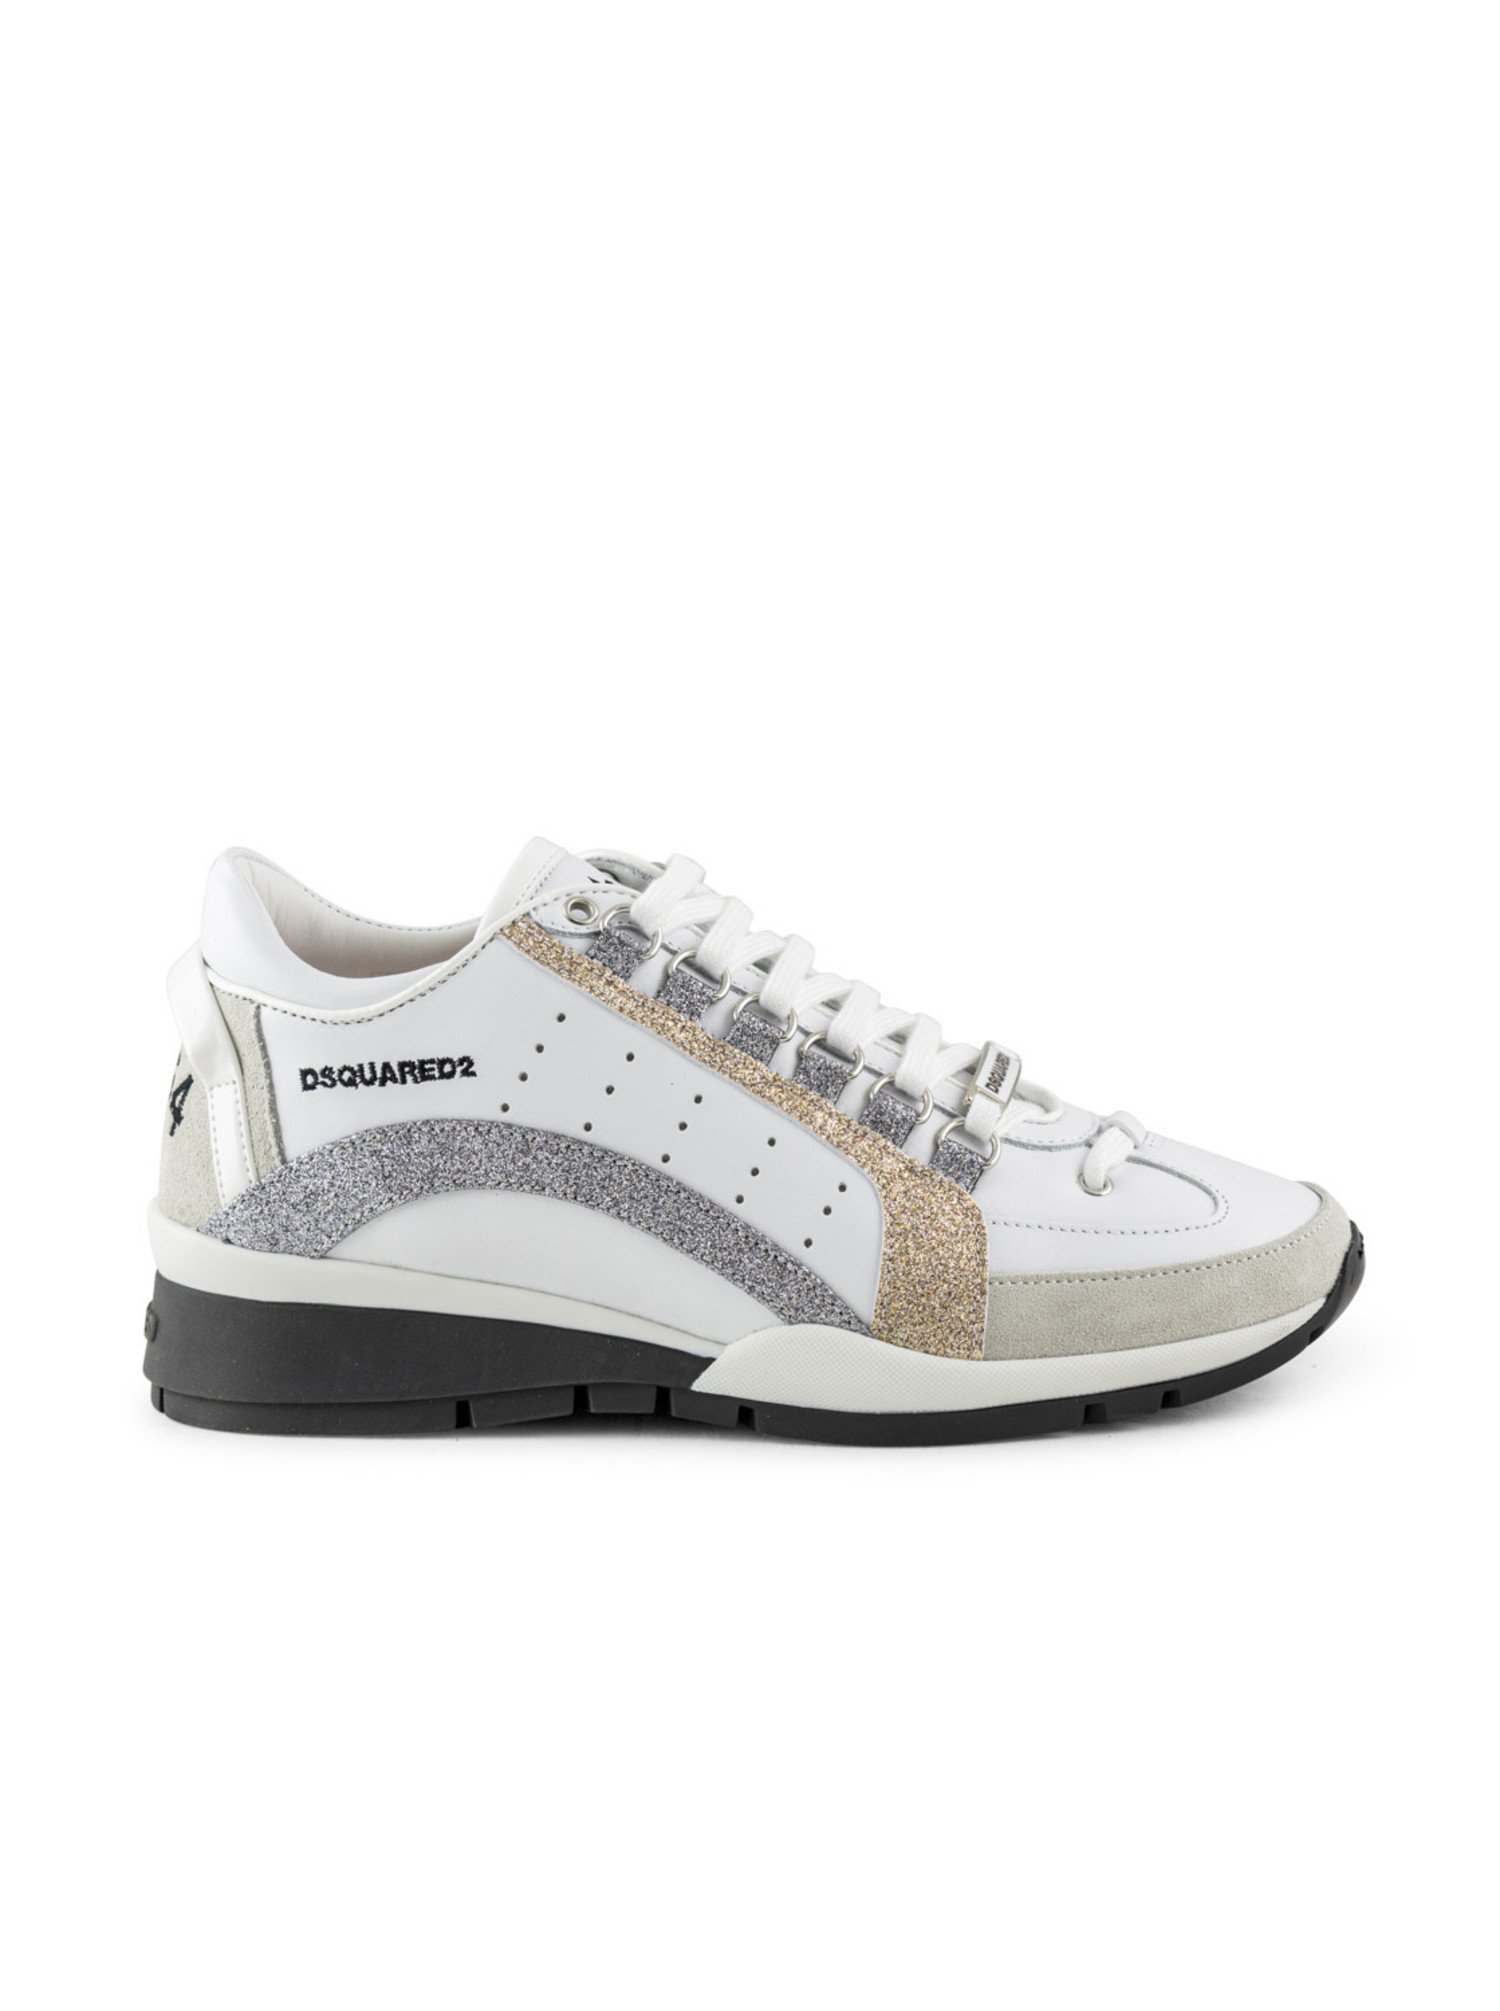 Perforatie Enzovoorts reservoir dsquared vrouwen sneakers Today's Deals- OFF-70% >Free Delivery